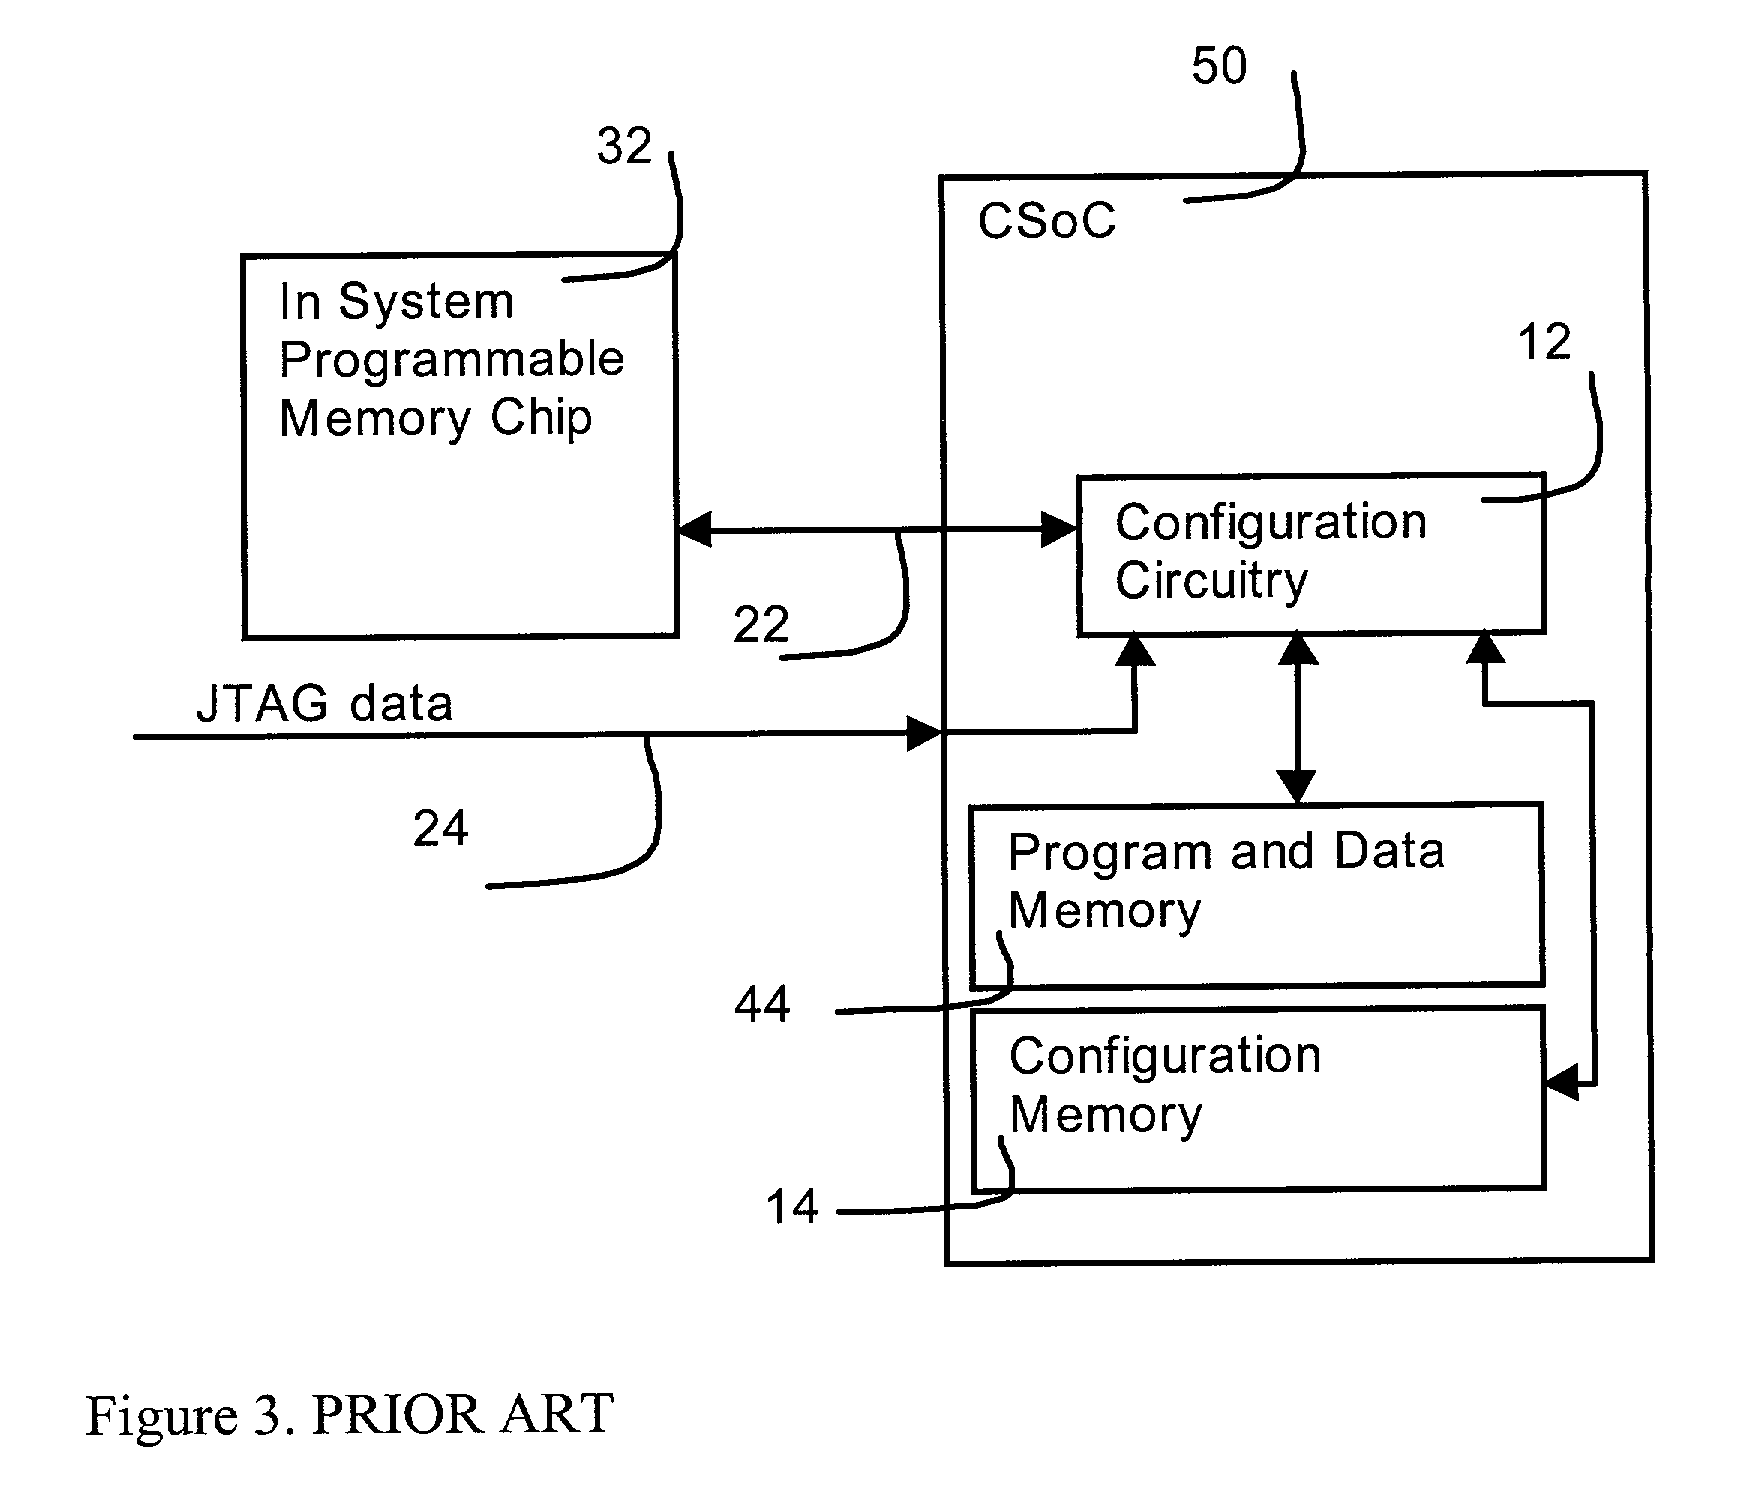 Method and apparatus for secure configuration of a field programmable gate array